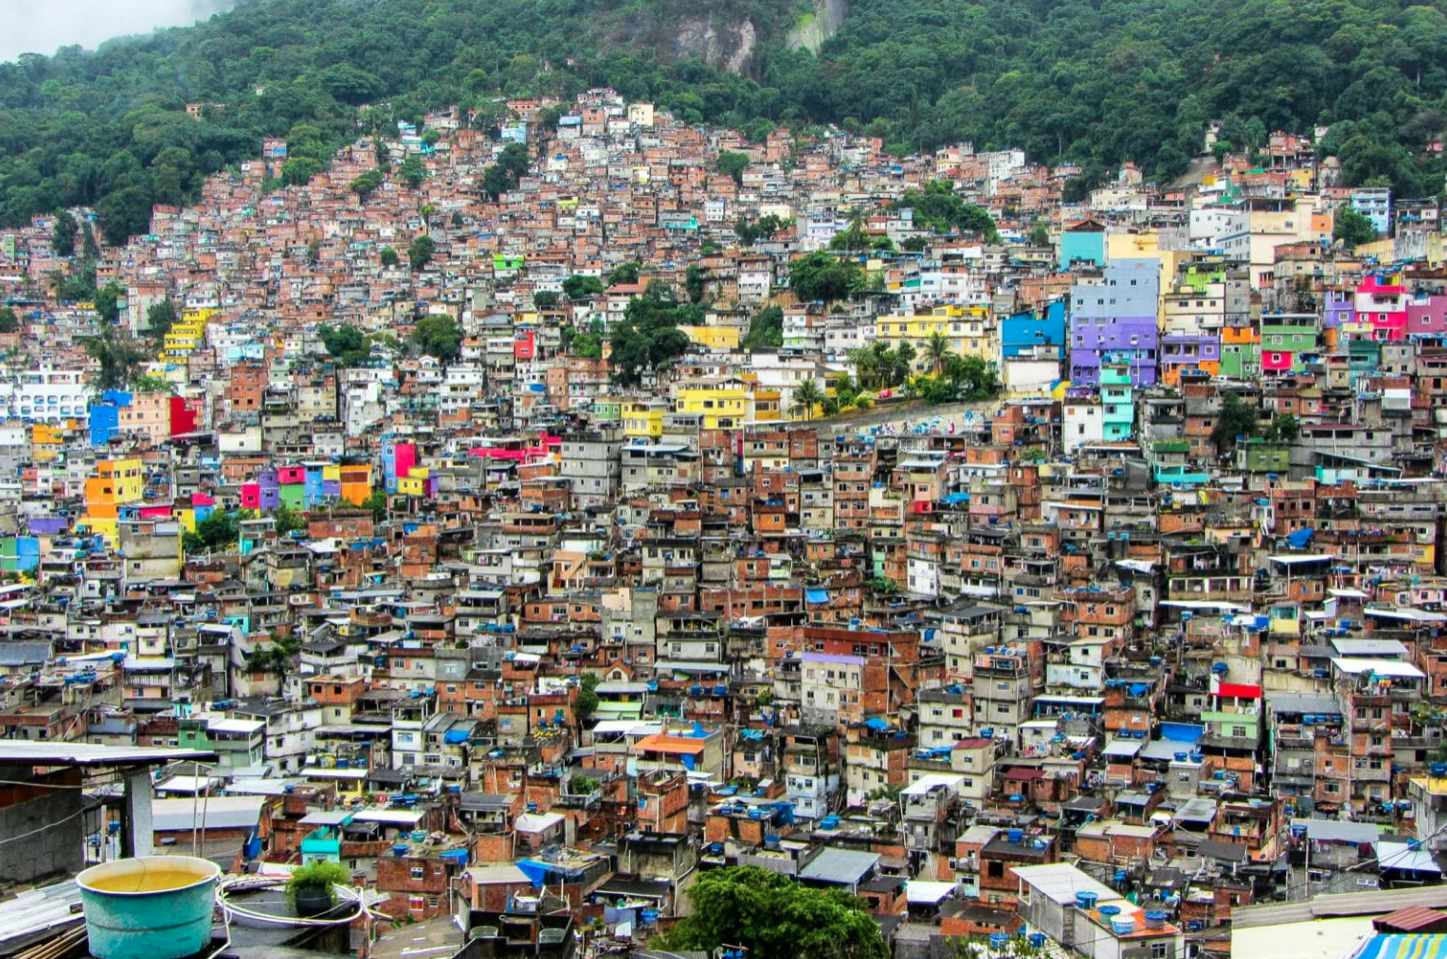 Activist groups across the globe are beginning to advocate for alternative land governance models (like community land trusts) for informal settlements. The Rio-based <a href="https://catcomm.org">Catalytic Communities</a> are proponents of similar actions in Brazil's favela communities. Credit: Journey Wonders